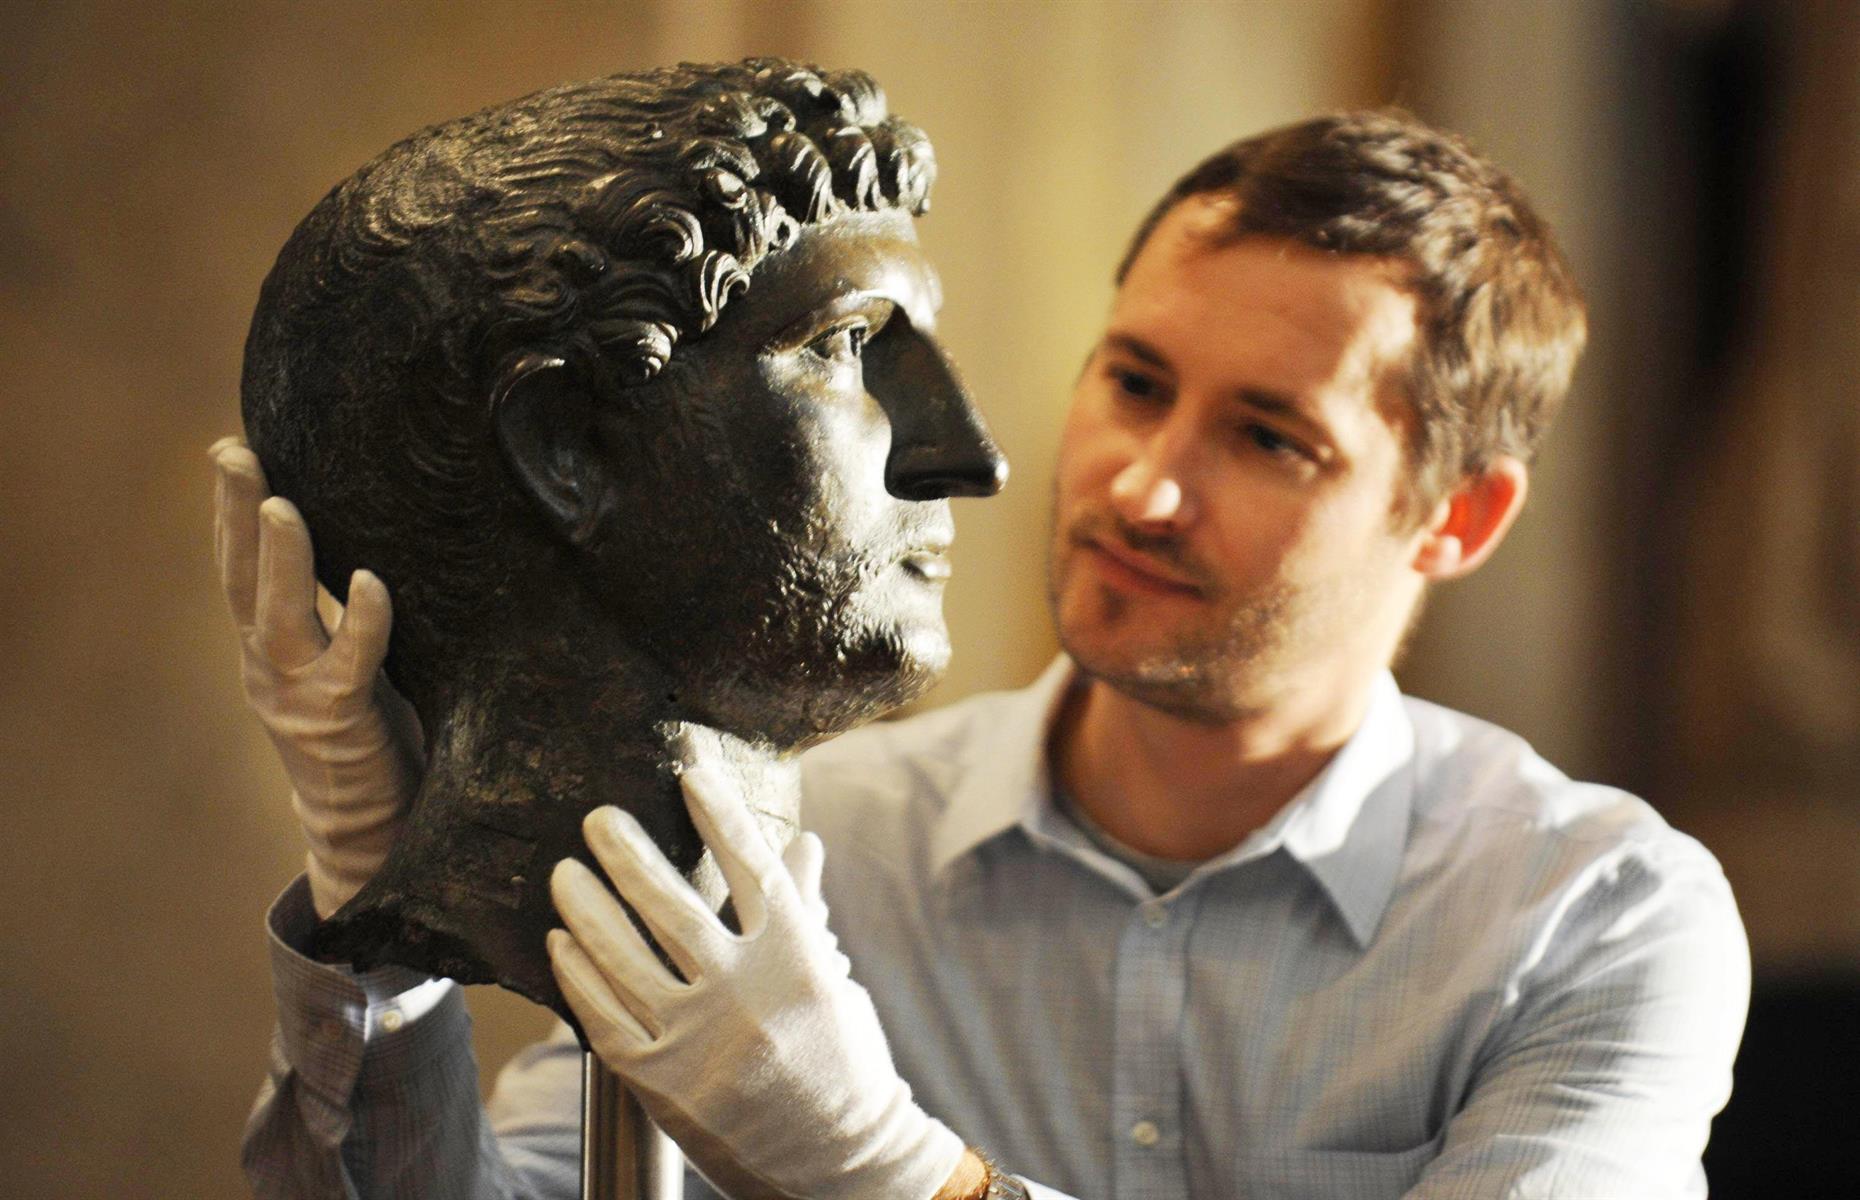 Head of Hadrian – value unknown